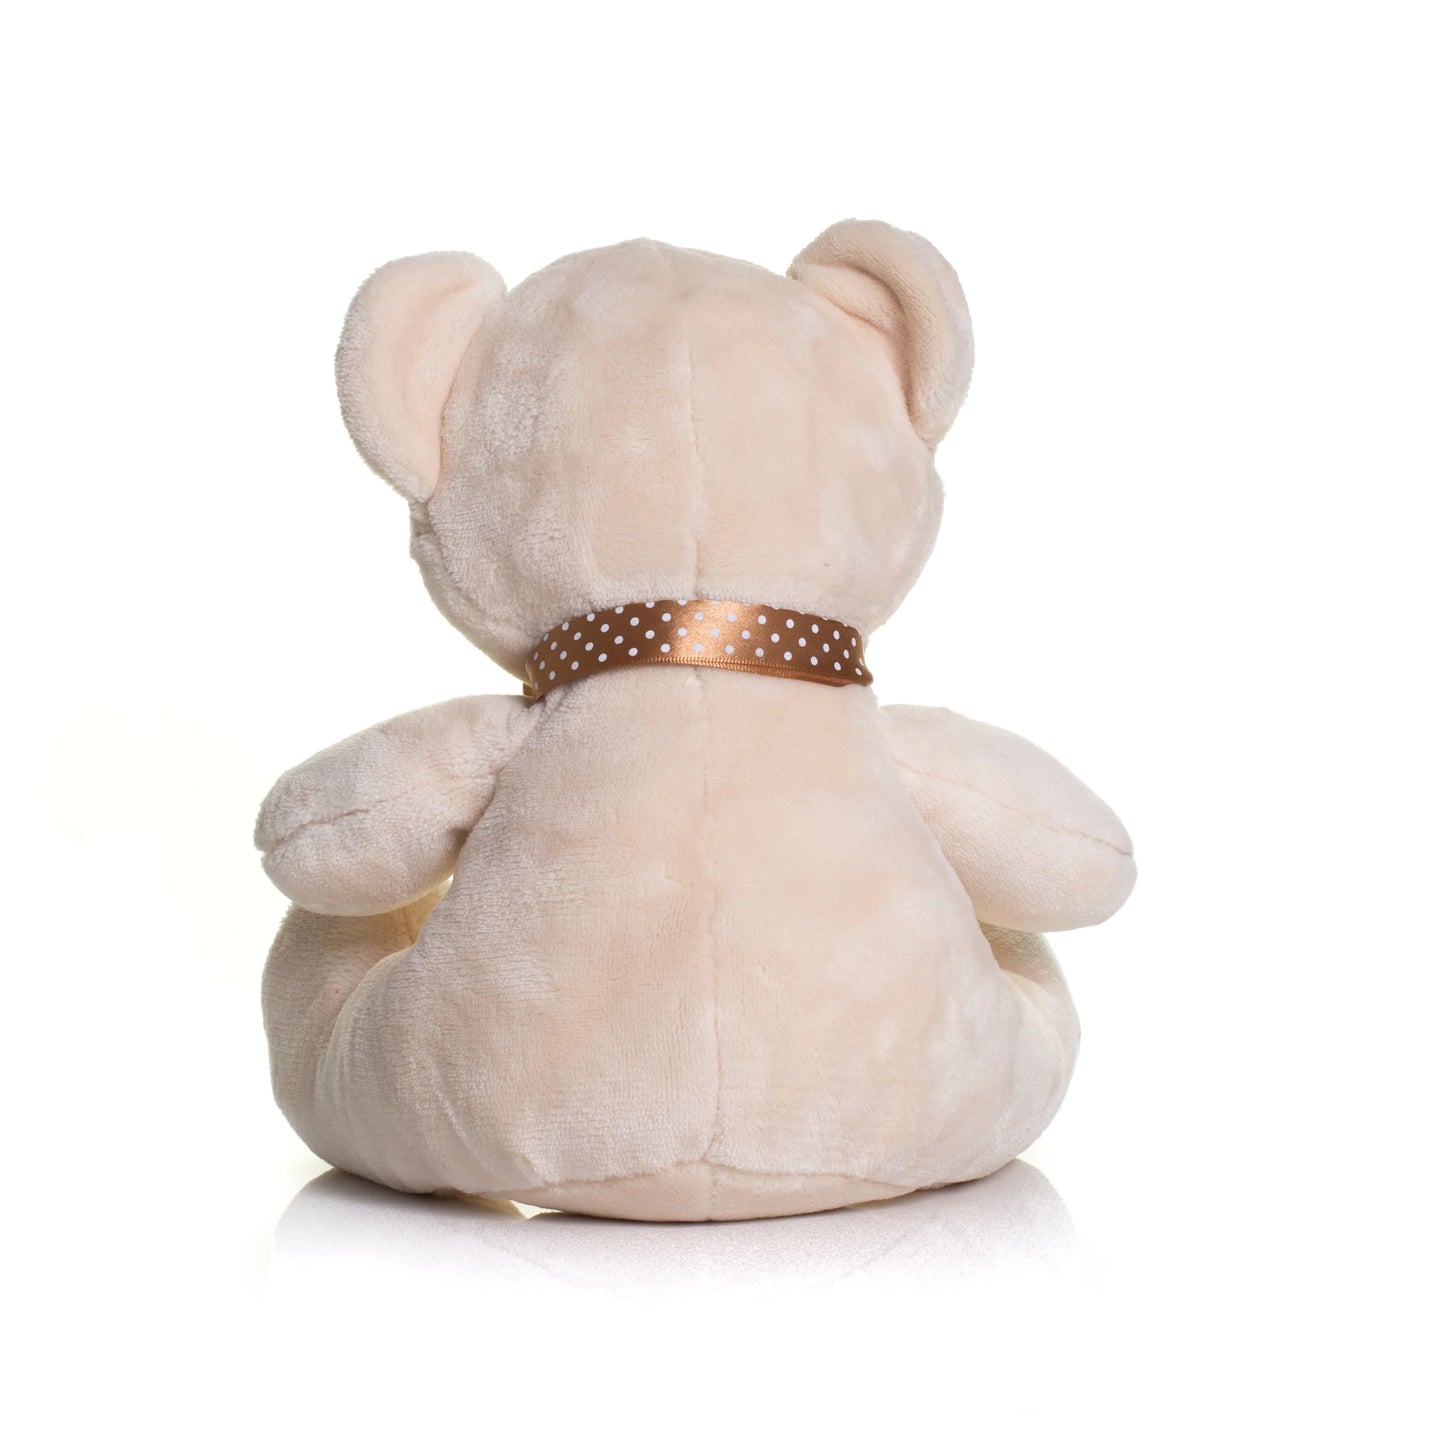 Personalised Teddy Bear - Printed with Personal Message - Lynendo Trade Store